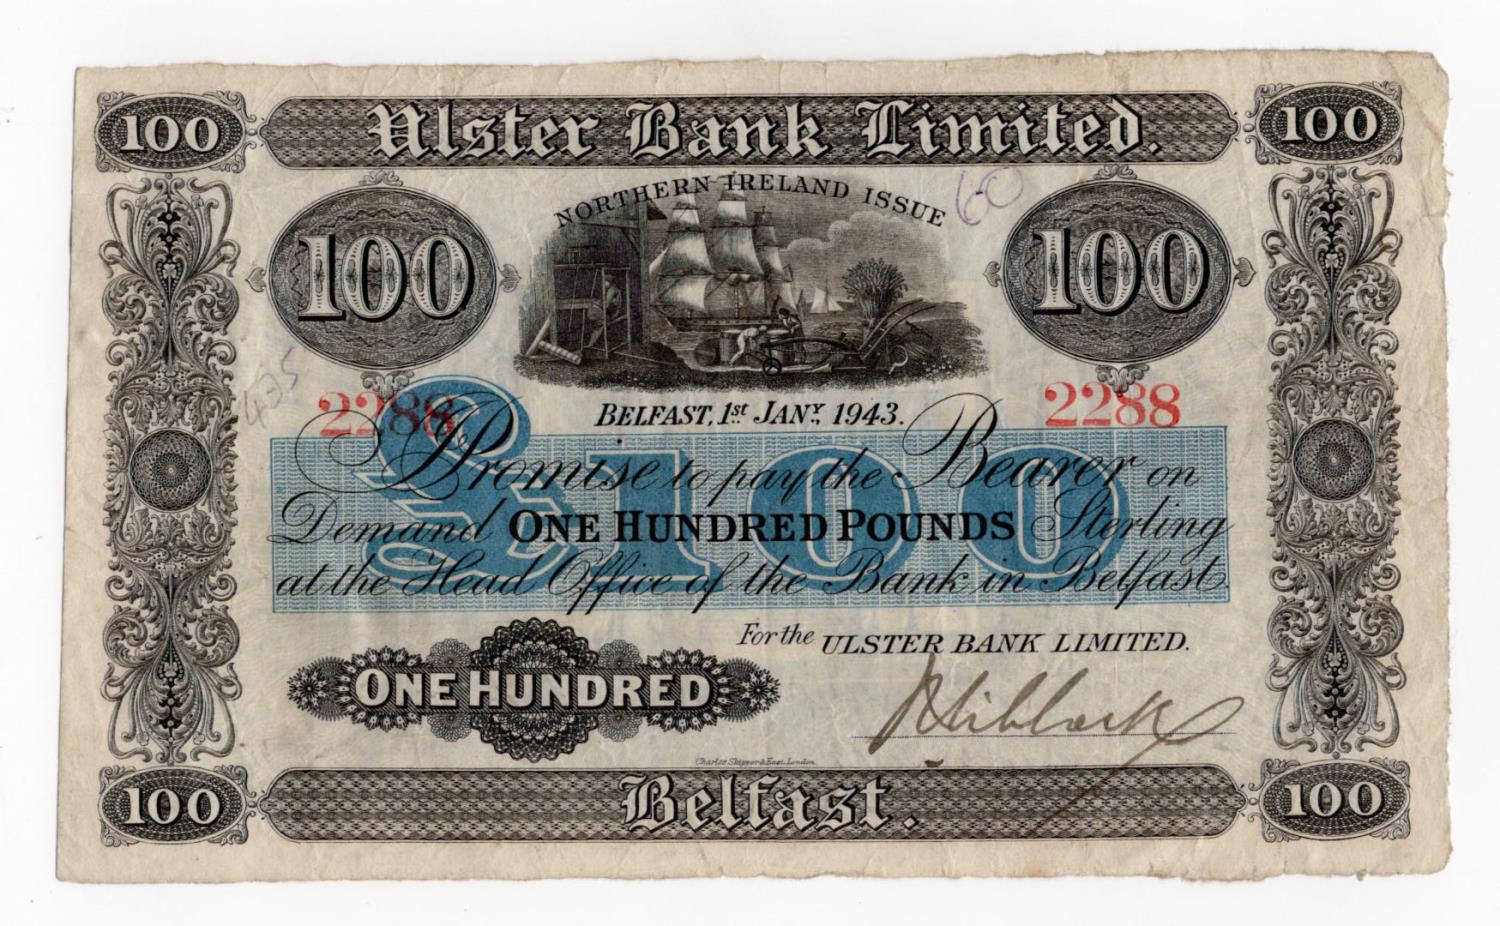 Northern Ireland, Ulster Bank Limited 100 Pounds dated 1st January 1943, handsigned James Niblock,